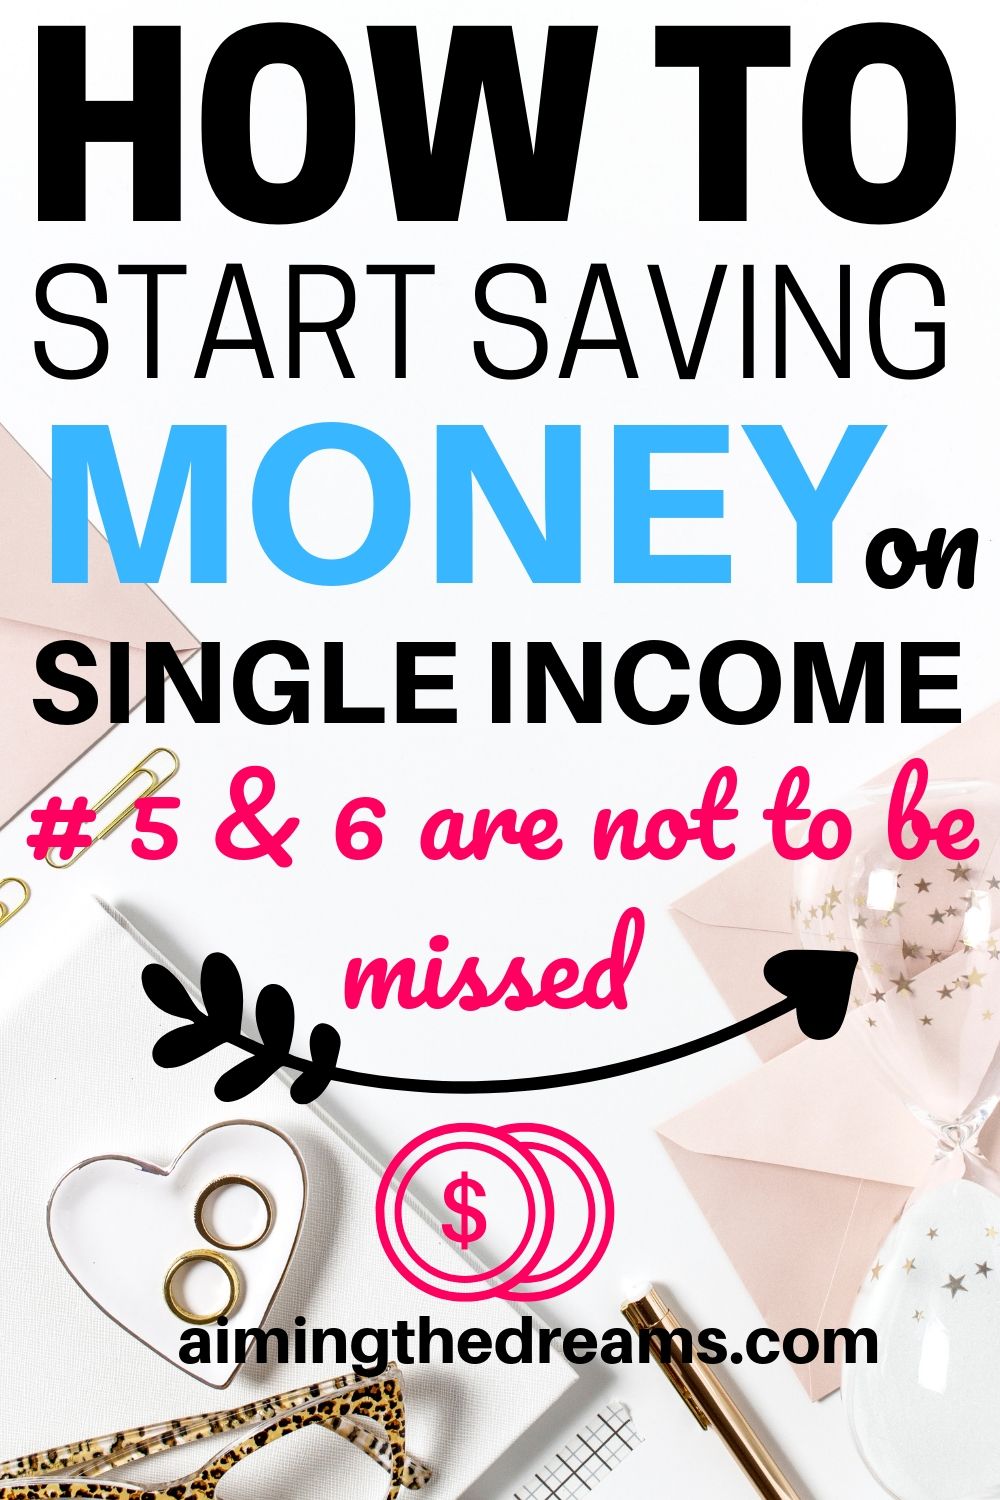 How to start saving money on single income. Make a budget, earn money with side hustles and build your emergency fund